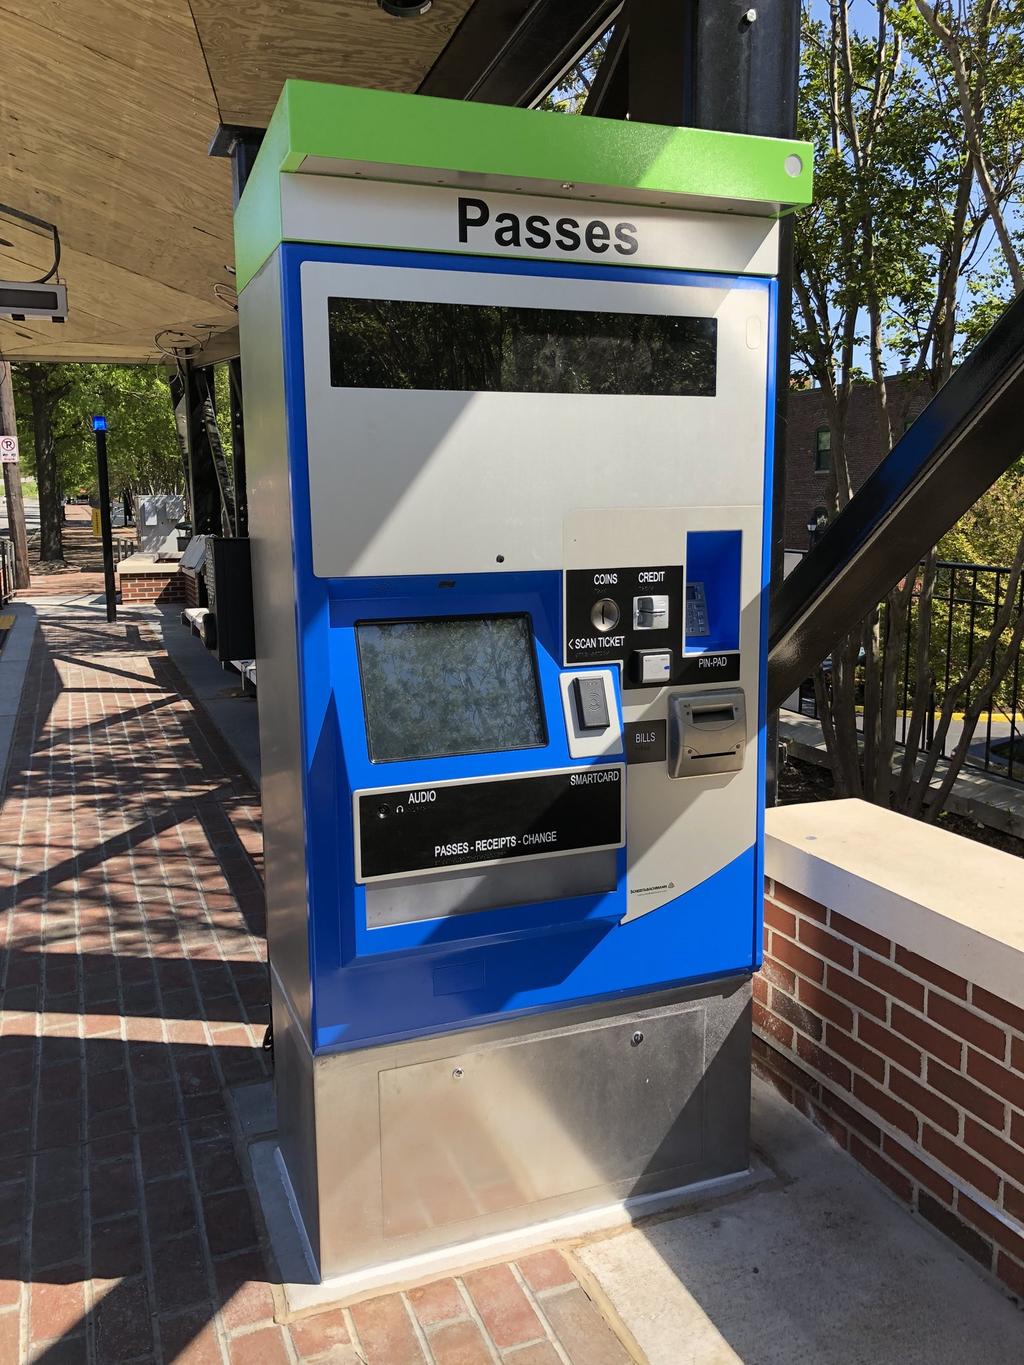 GRTC PULSE SAFETY & HOW TO RIDE Riding The Pulse: Paying to Ride Ticket Vending Machines: off-board fare collection. Passes active when issued!